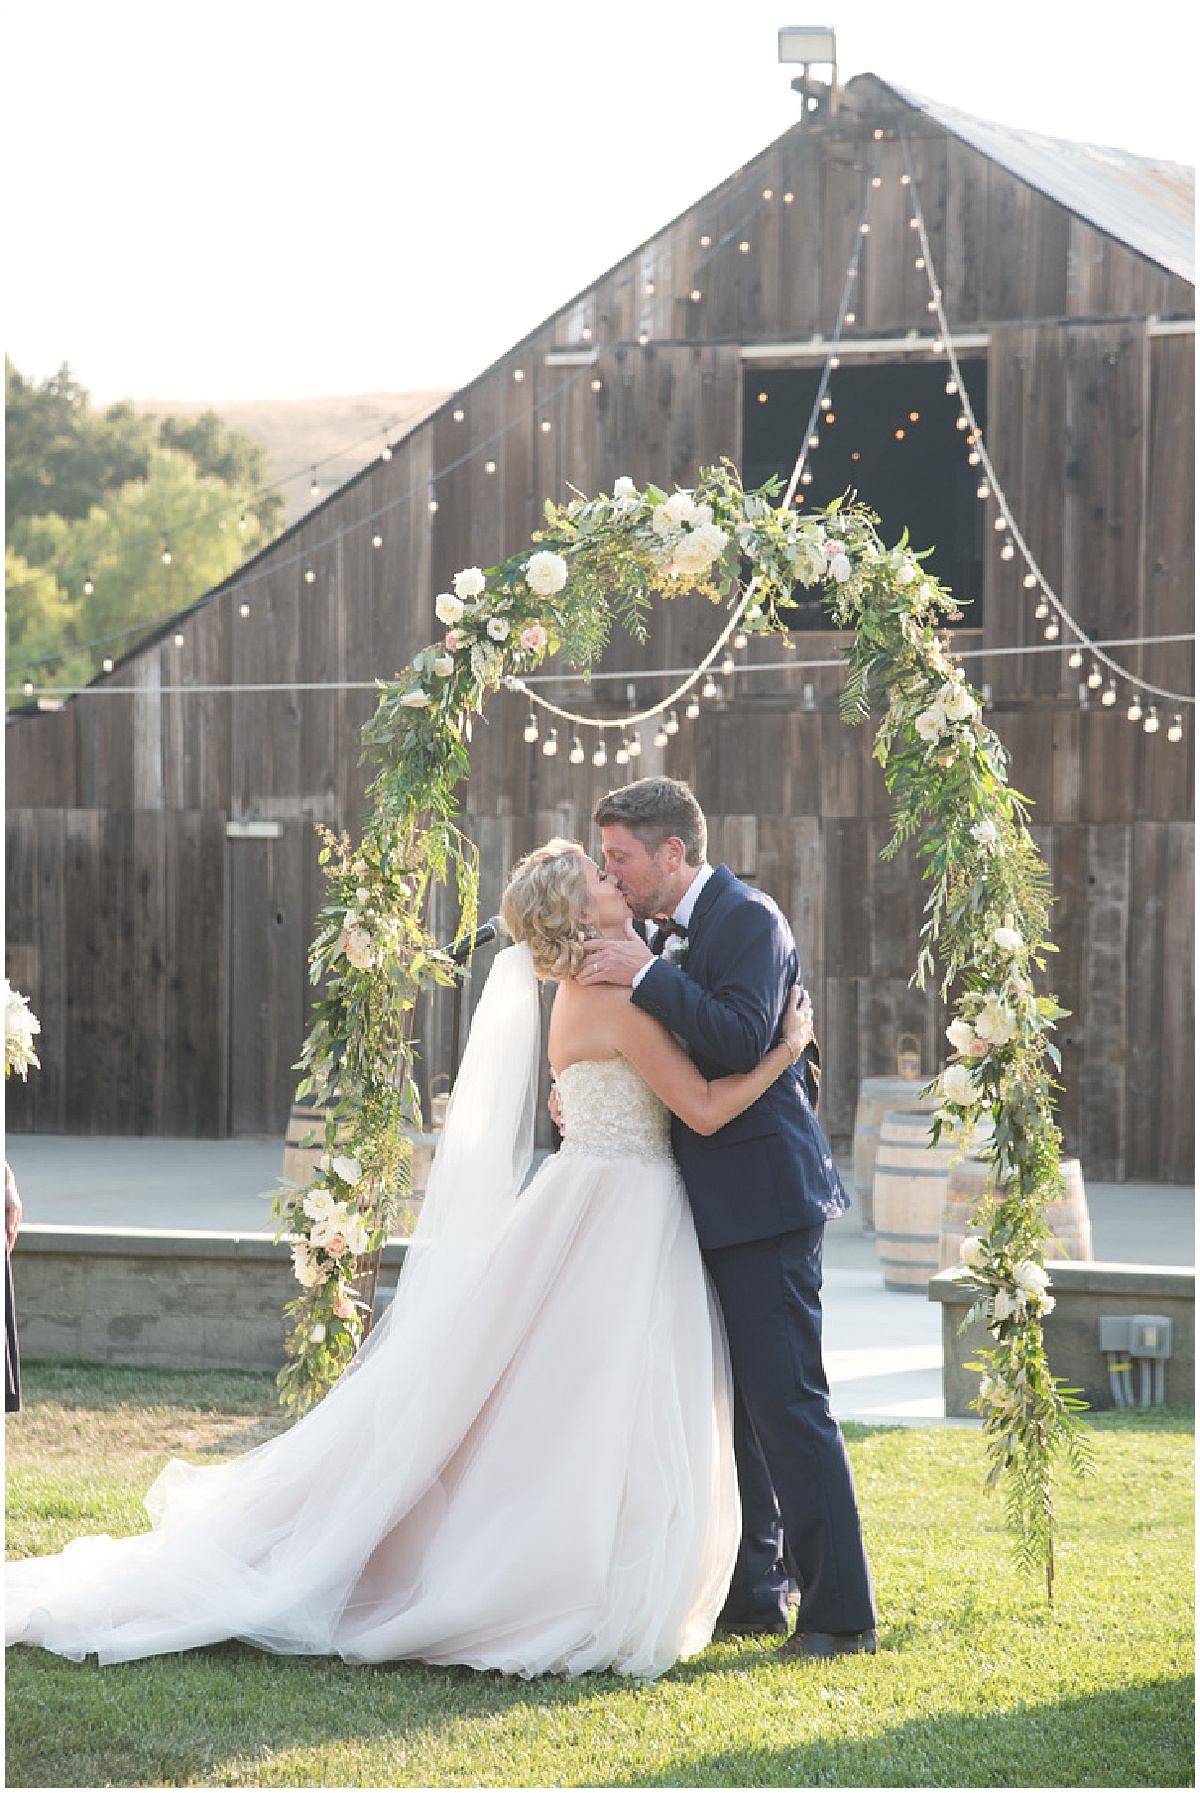 Natalie and Chris married at Higuera Ranch in San Luis Obispo, California navy and blush